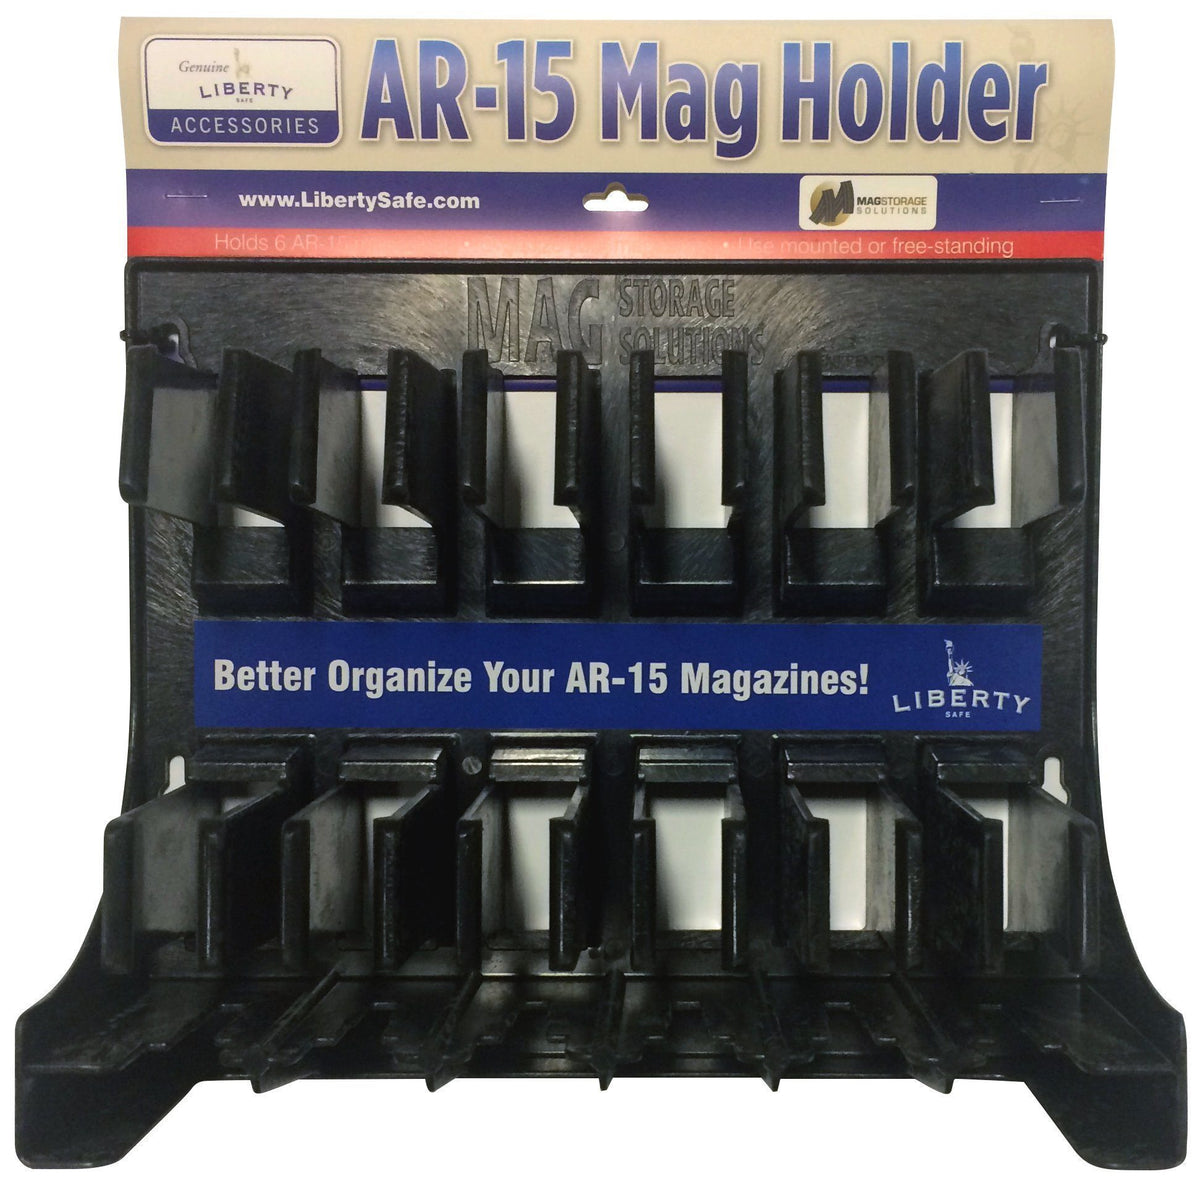 Liberty Safe AR-15 Magazine Holder, front view.